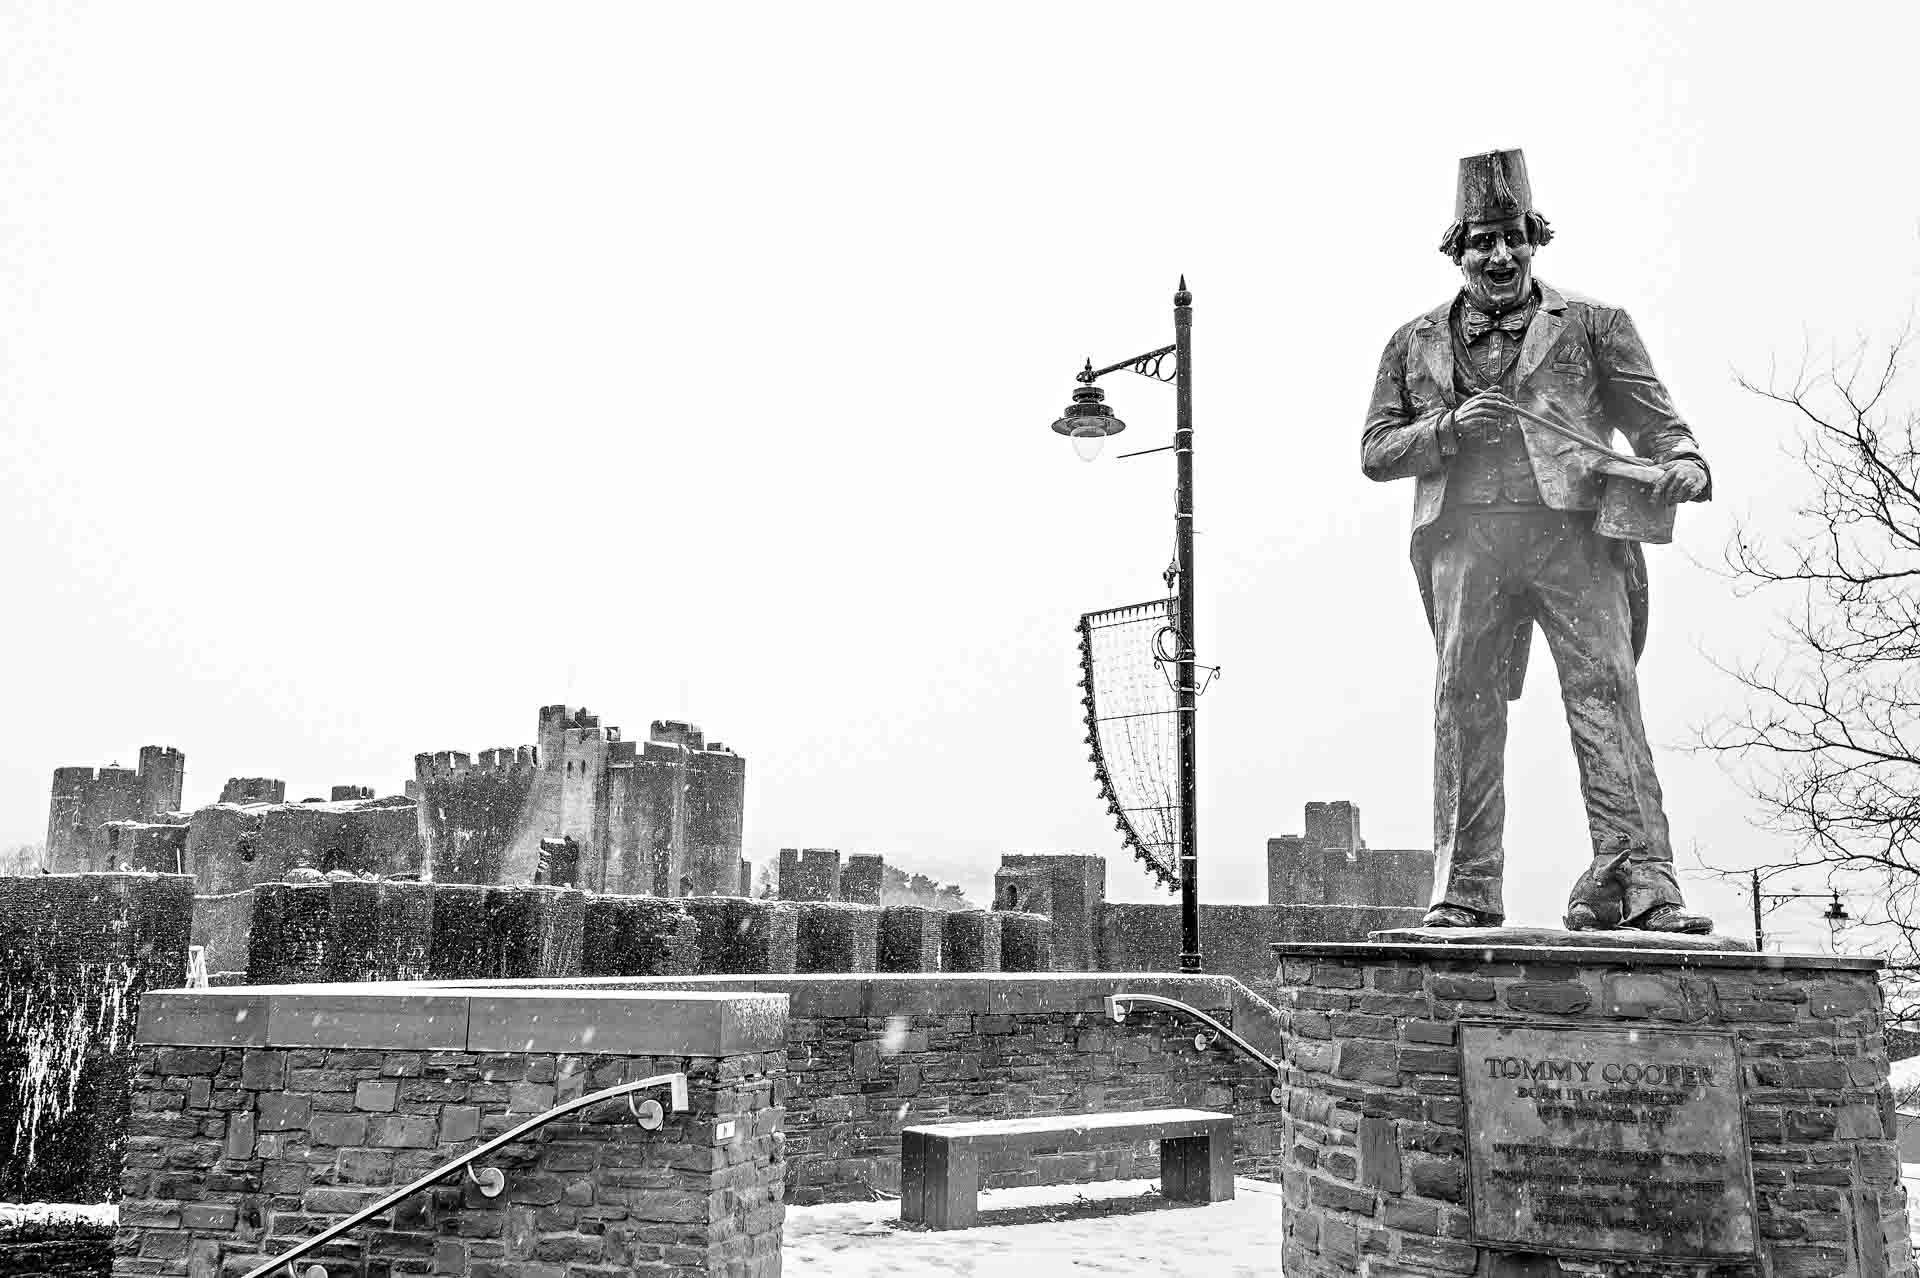 Caerphilly Wedding Photographers - The Tommy Cooper Statue with Castle Behind